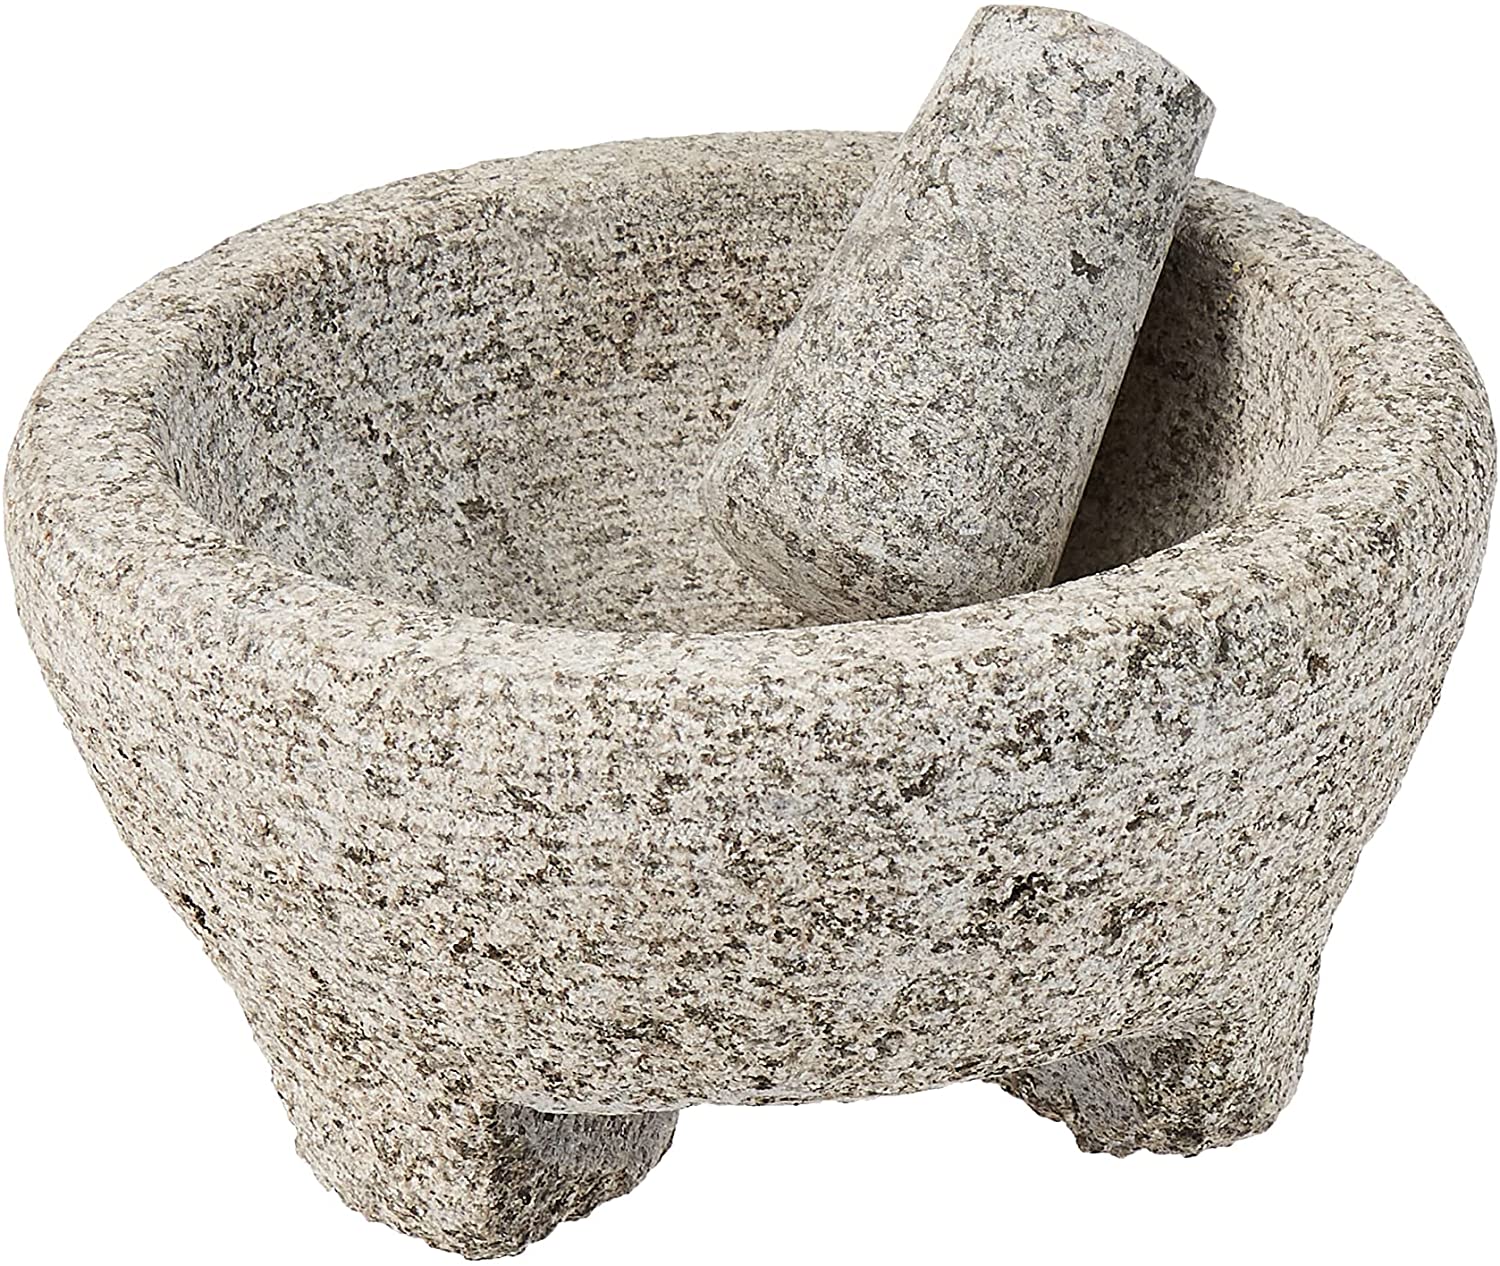 KitchenCraft World of Flavours Kitchen Craft World of Flavours Mortar and Pestle, Mexican